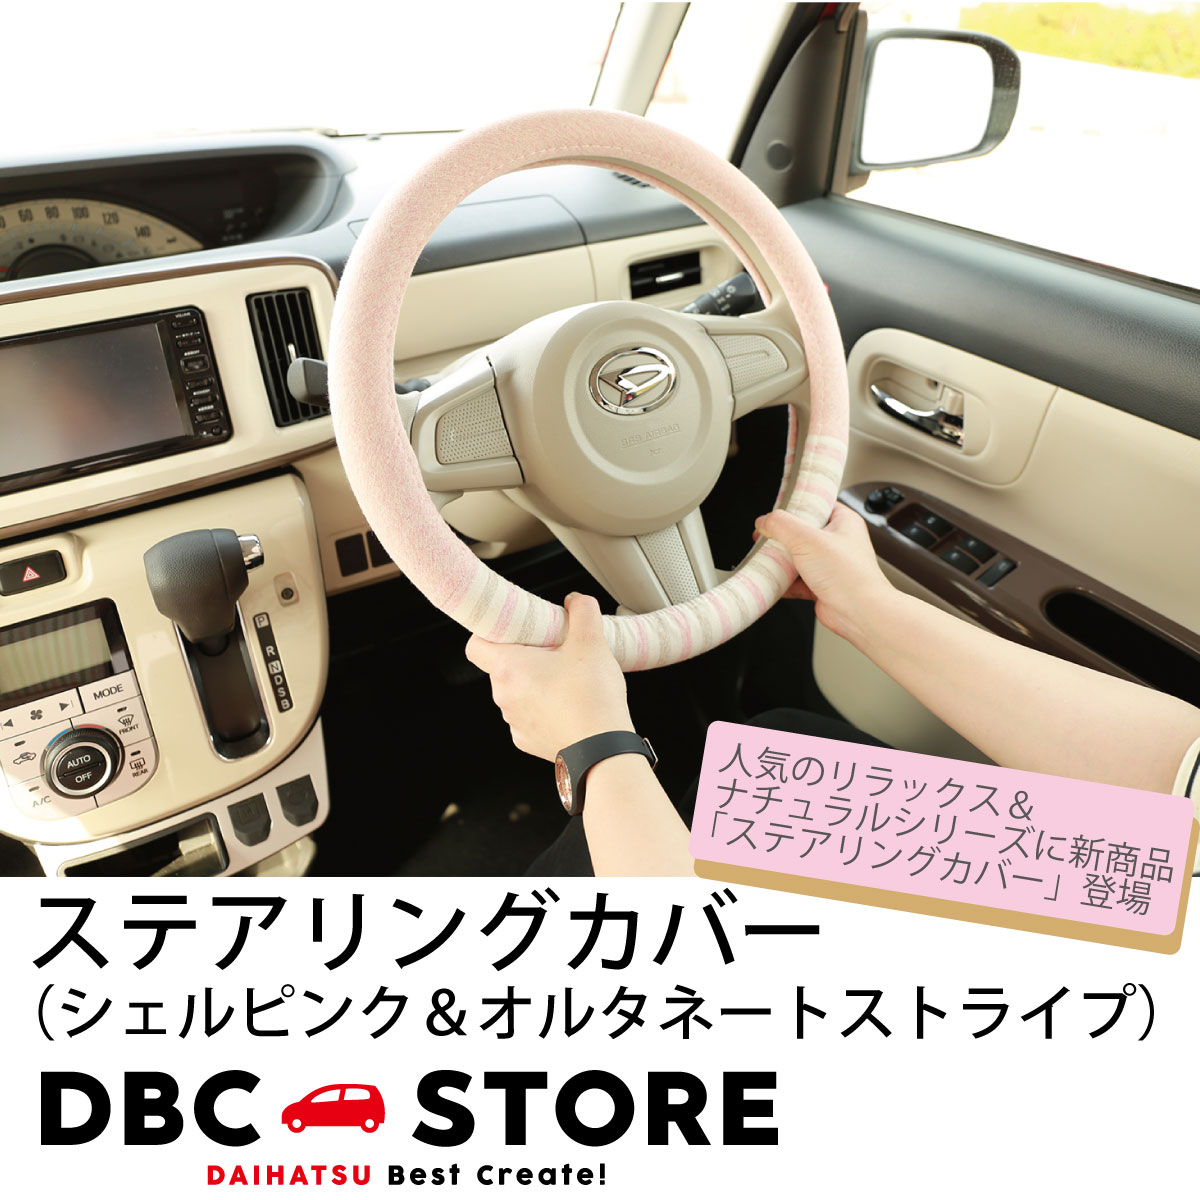 Daihatsu Light Car Light Frequent Use Nature Material Interior Parts Cute Natural Fashion Simple Pastel Pink Relaxation Natural Style Steering Cover